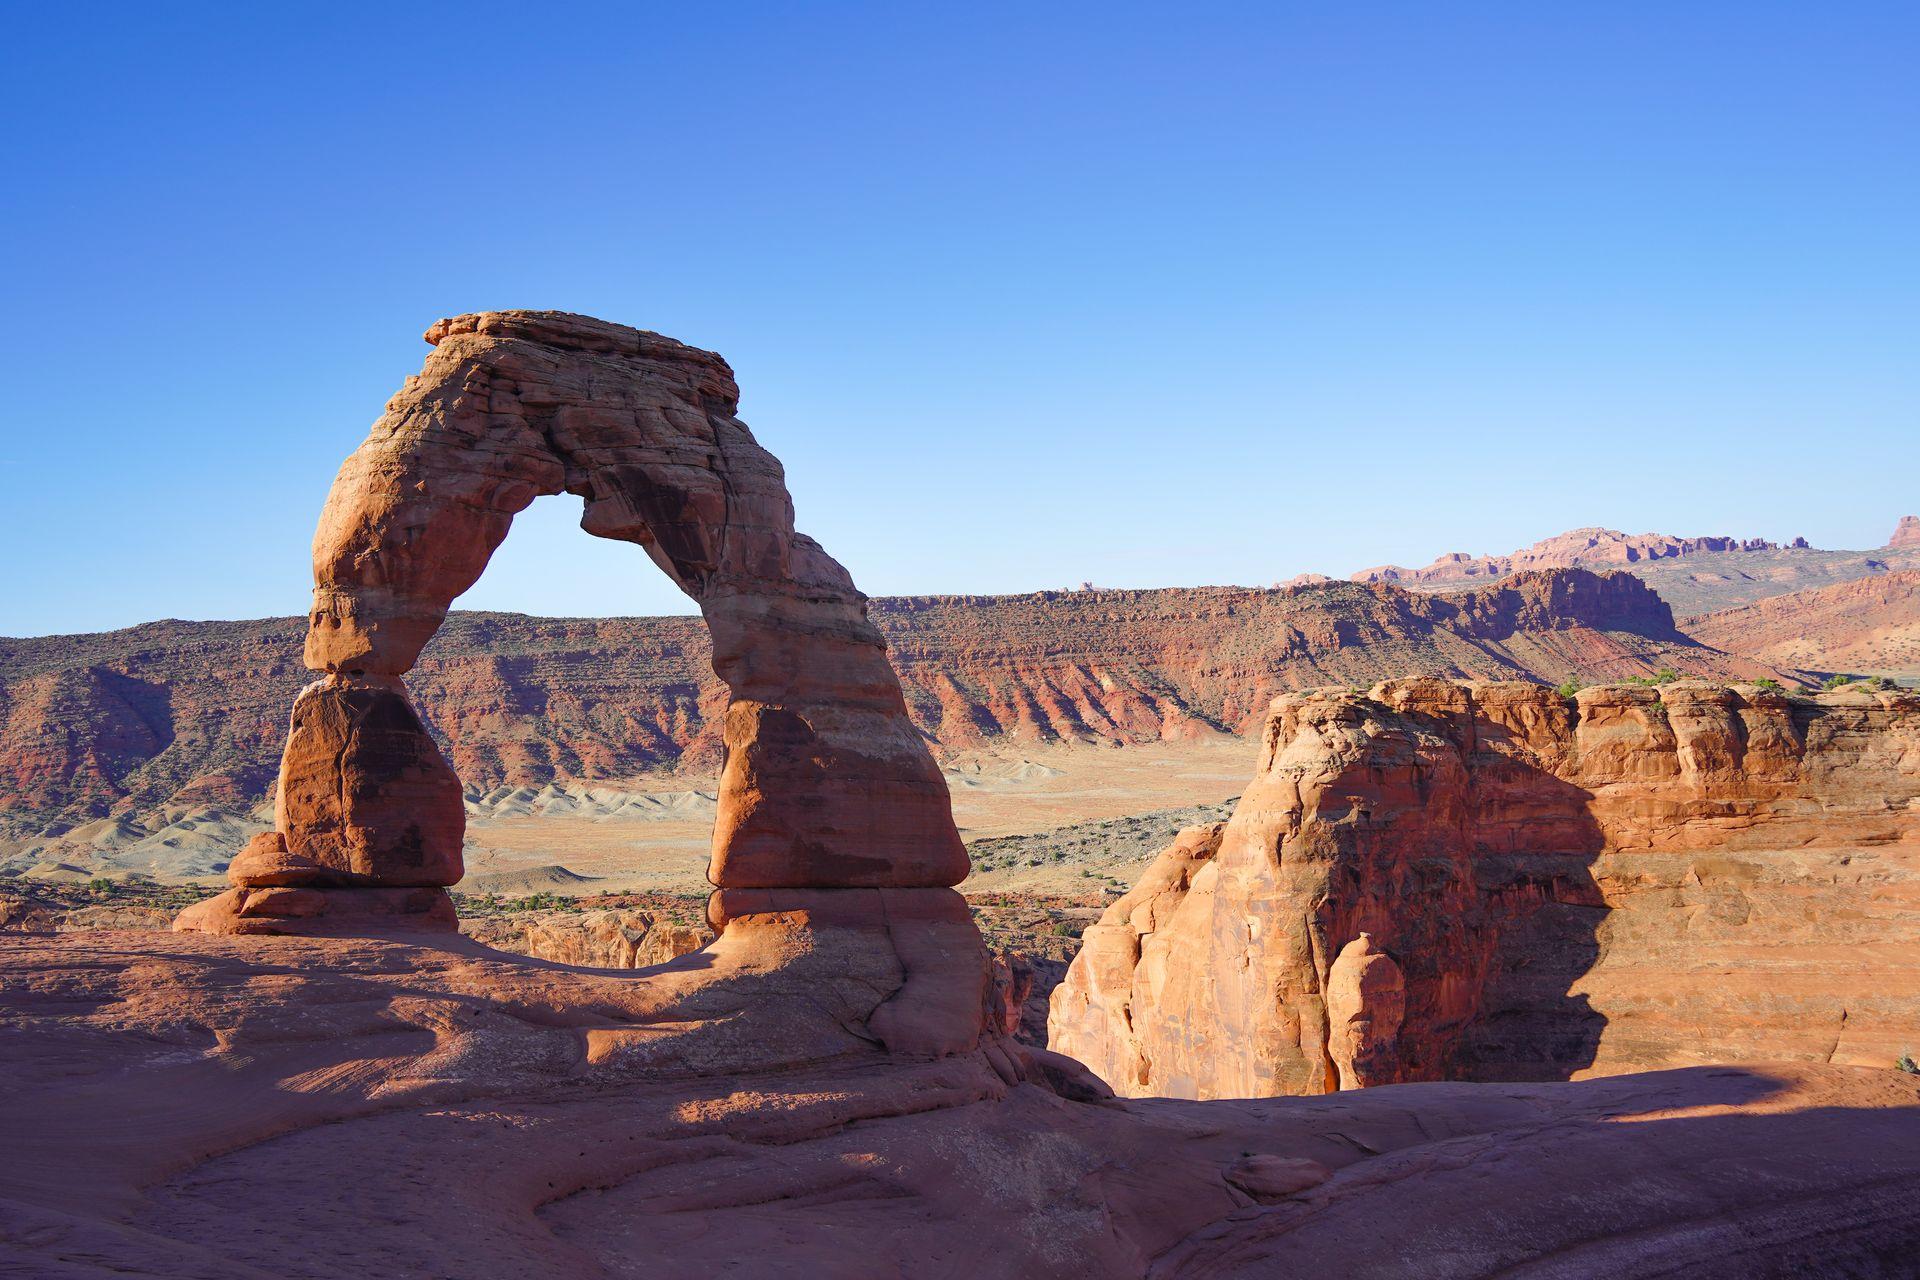 A view of Delicate Arch from up close.